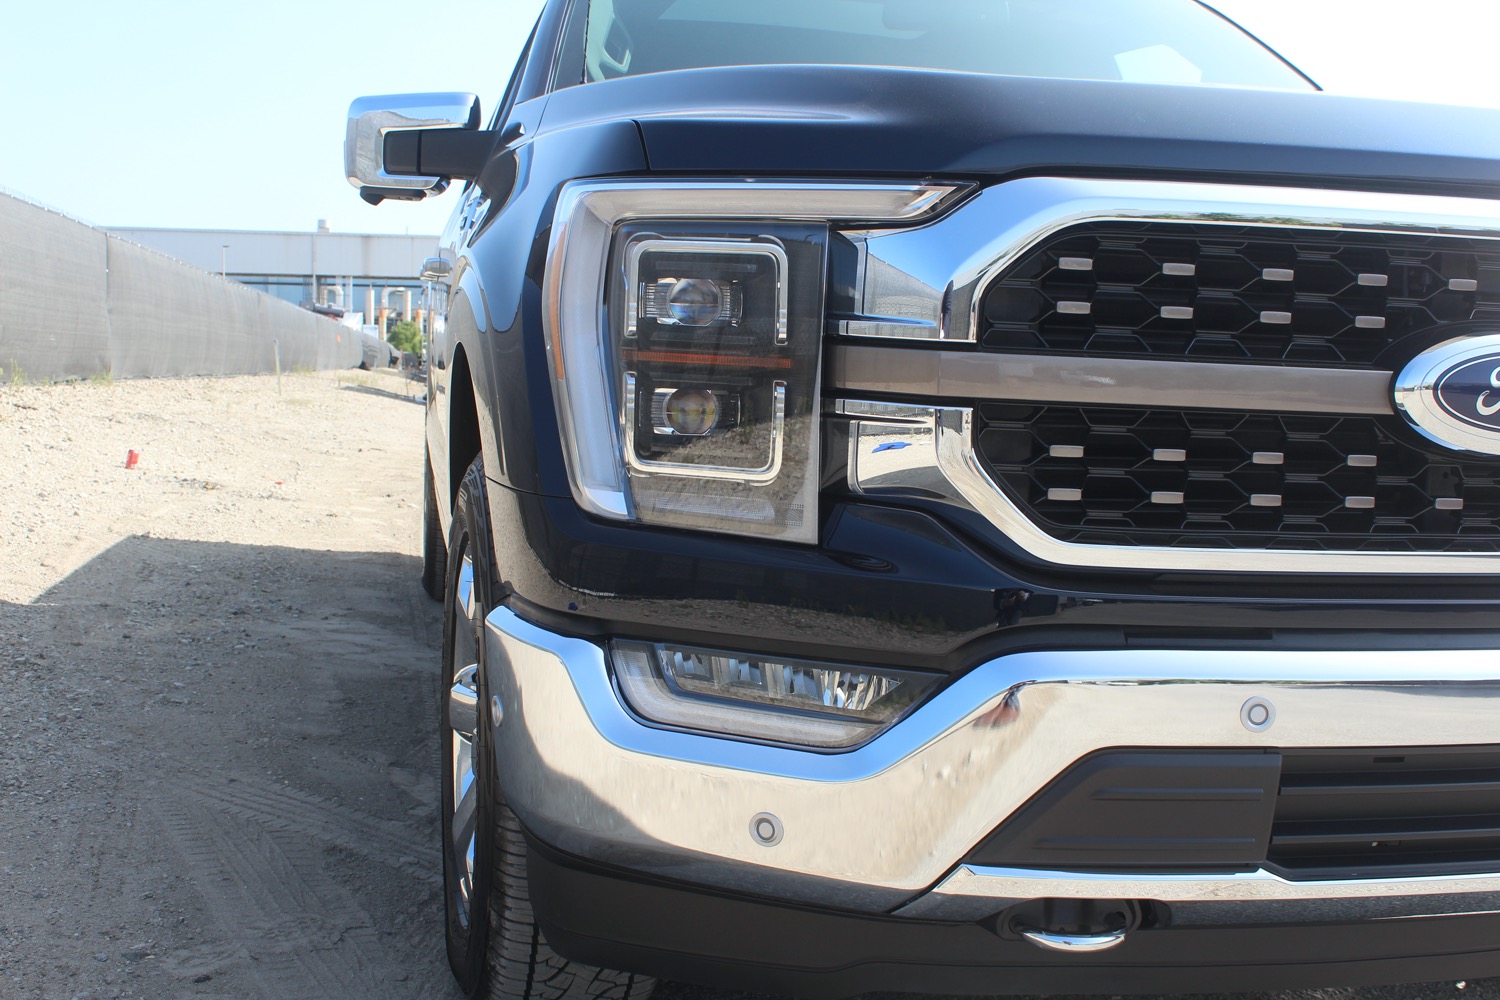 Ford Bronco Antimatter Blue real life look - on 2021 F-150 Antimatter Blue 2021 F-150 King Ranch Chrome 9